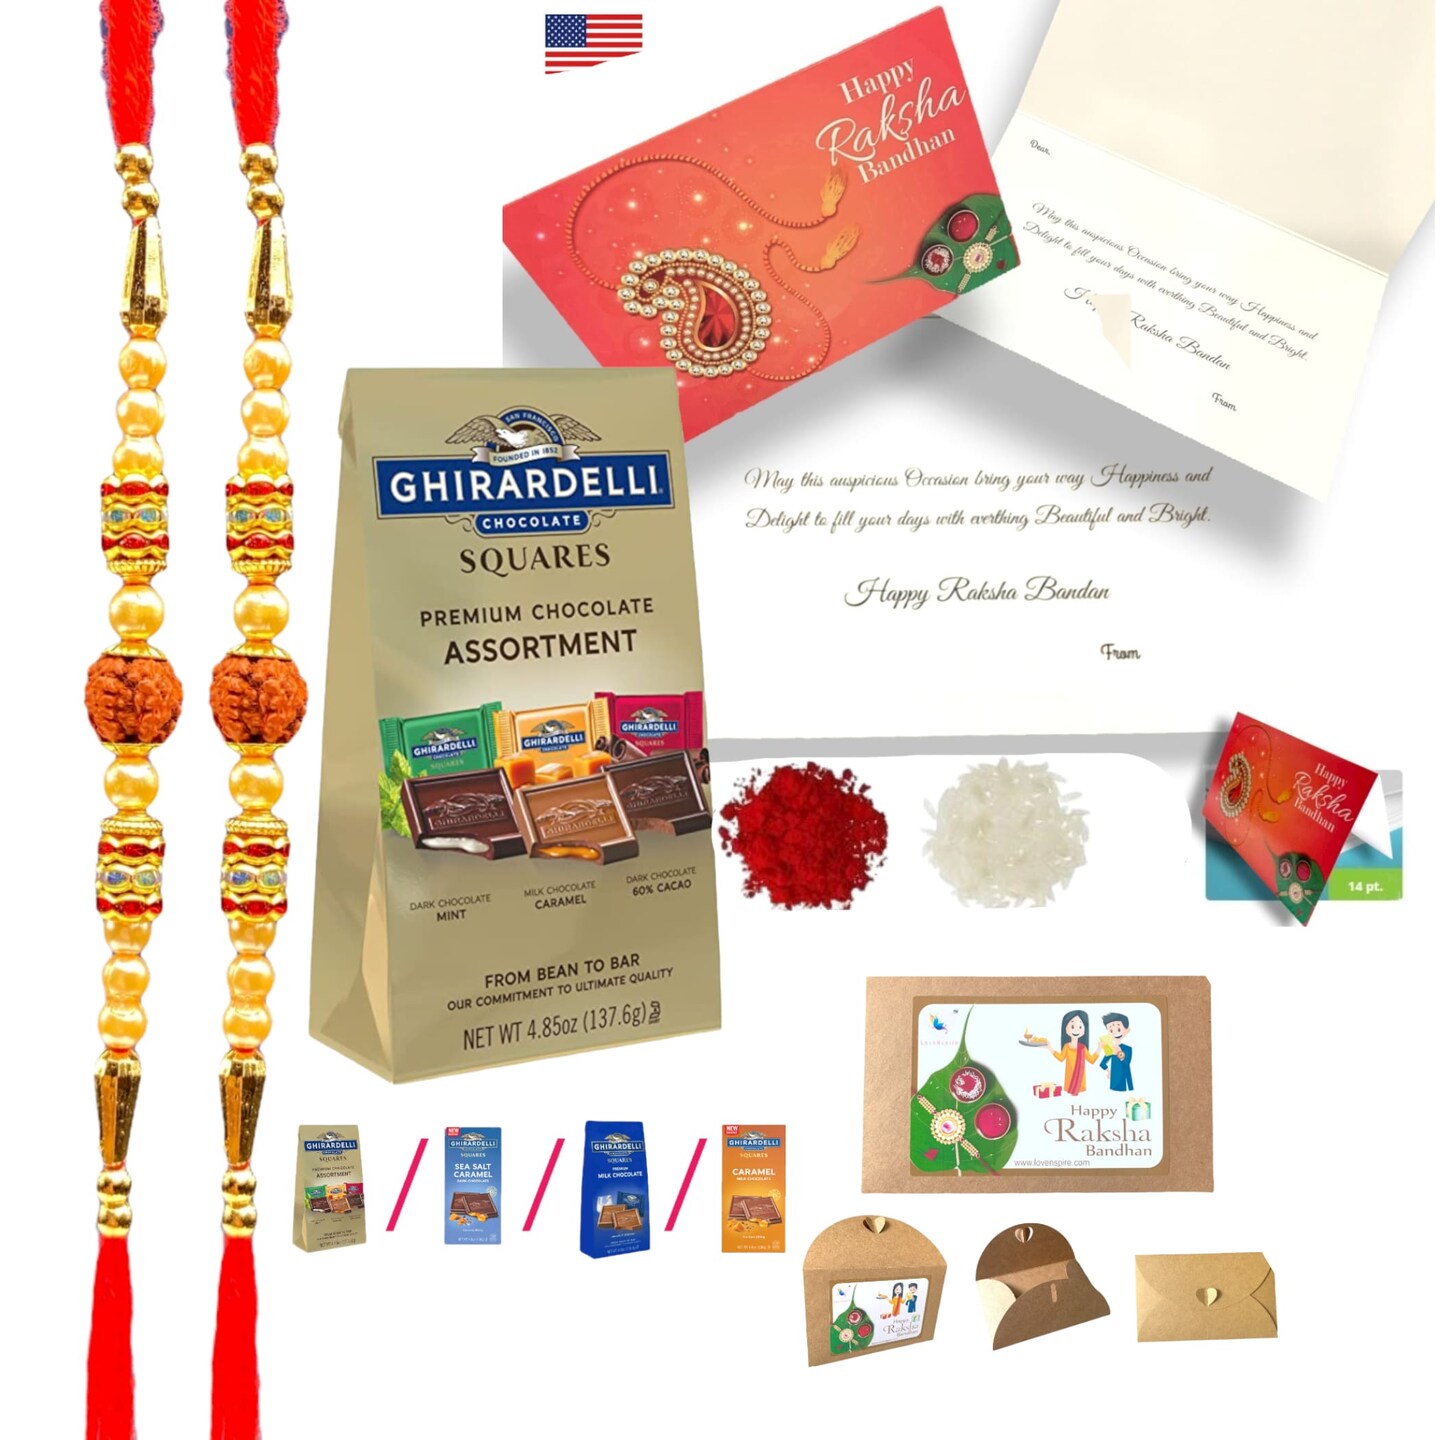 Rakhi Gifts to India | Rakhi Gift for Brother in India | Free Delivery